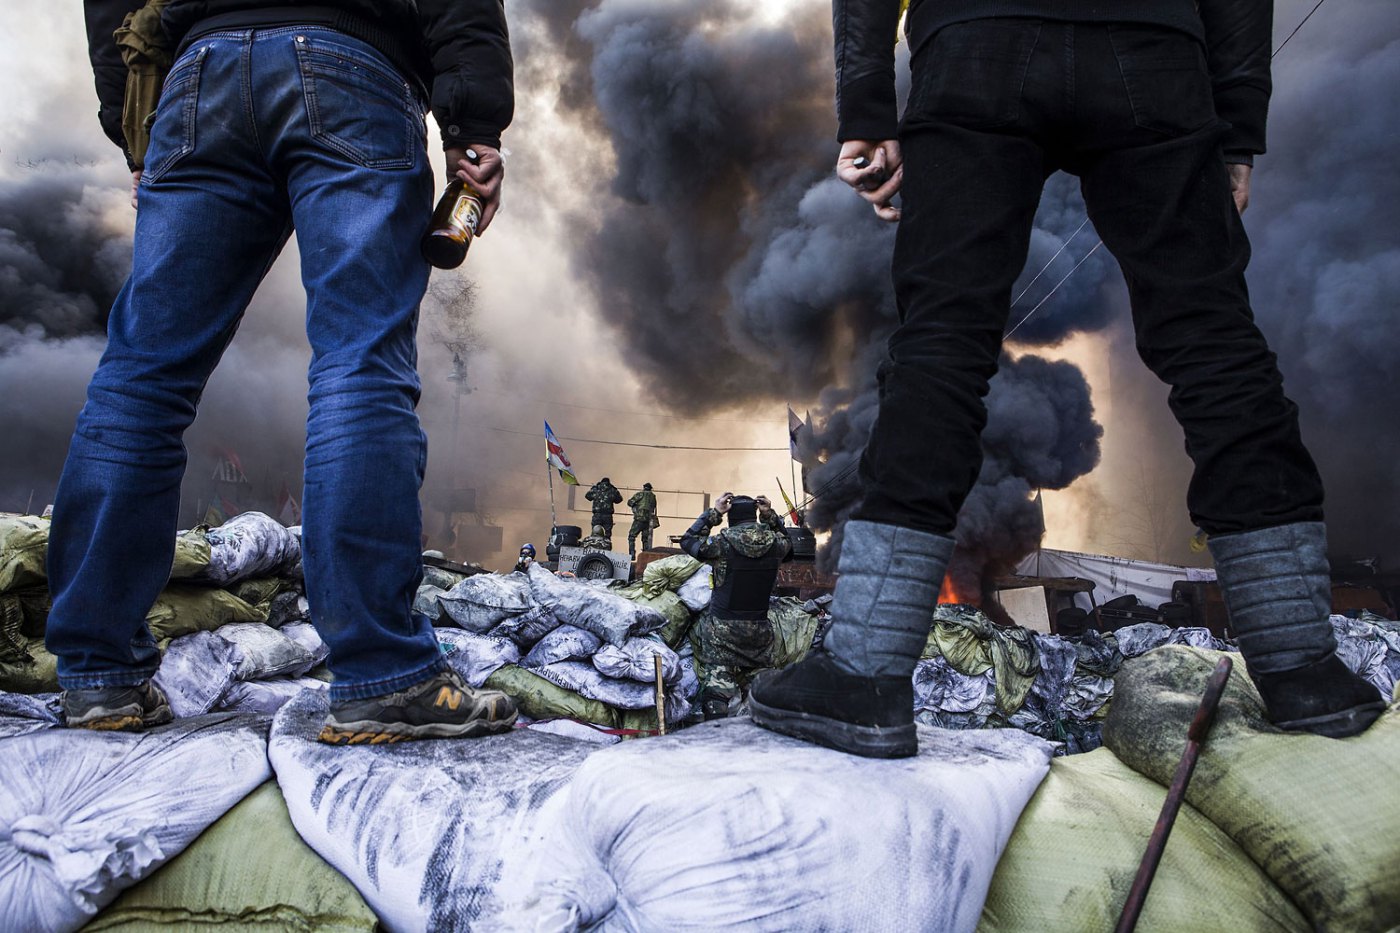 Anti-government demonstrators stand on barricades during clashes with riot police, Feb. 18, 2014.